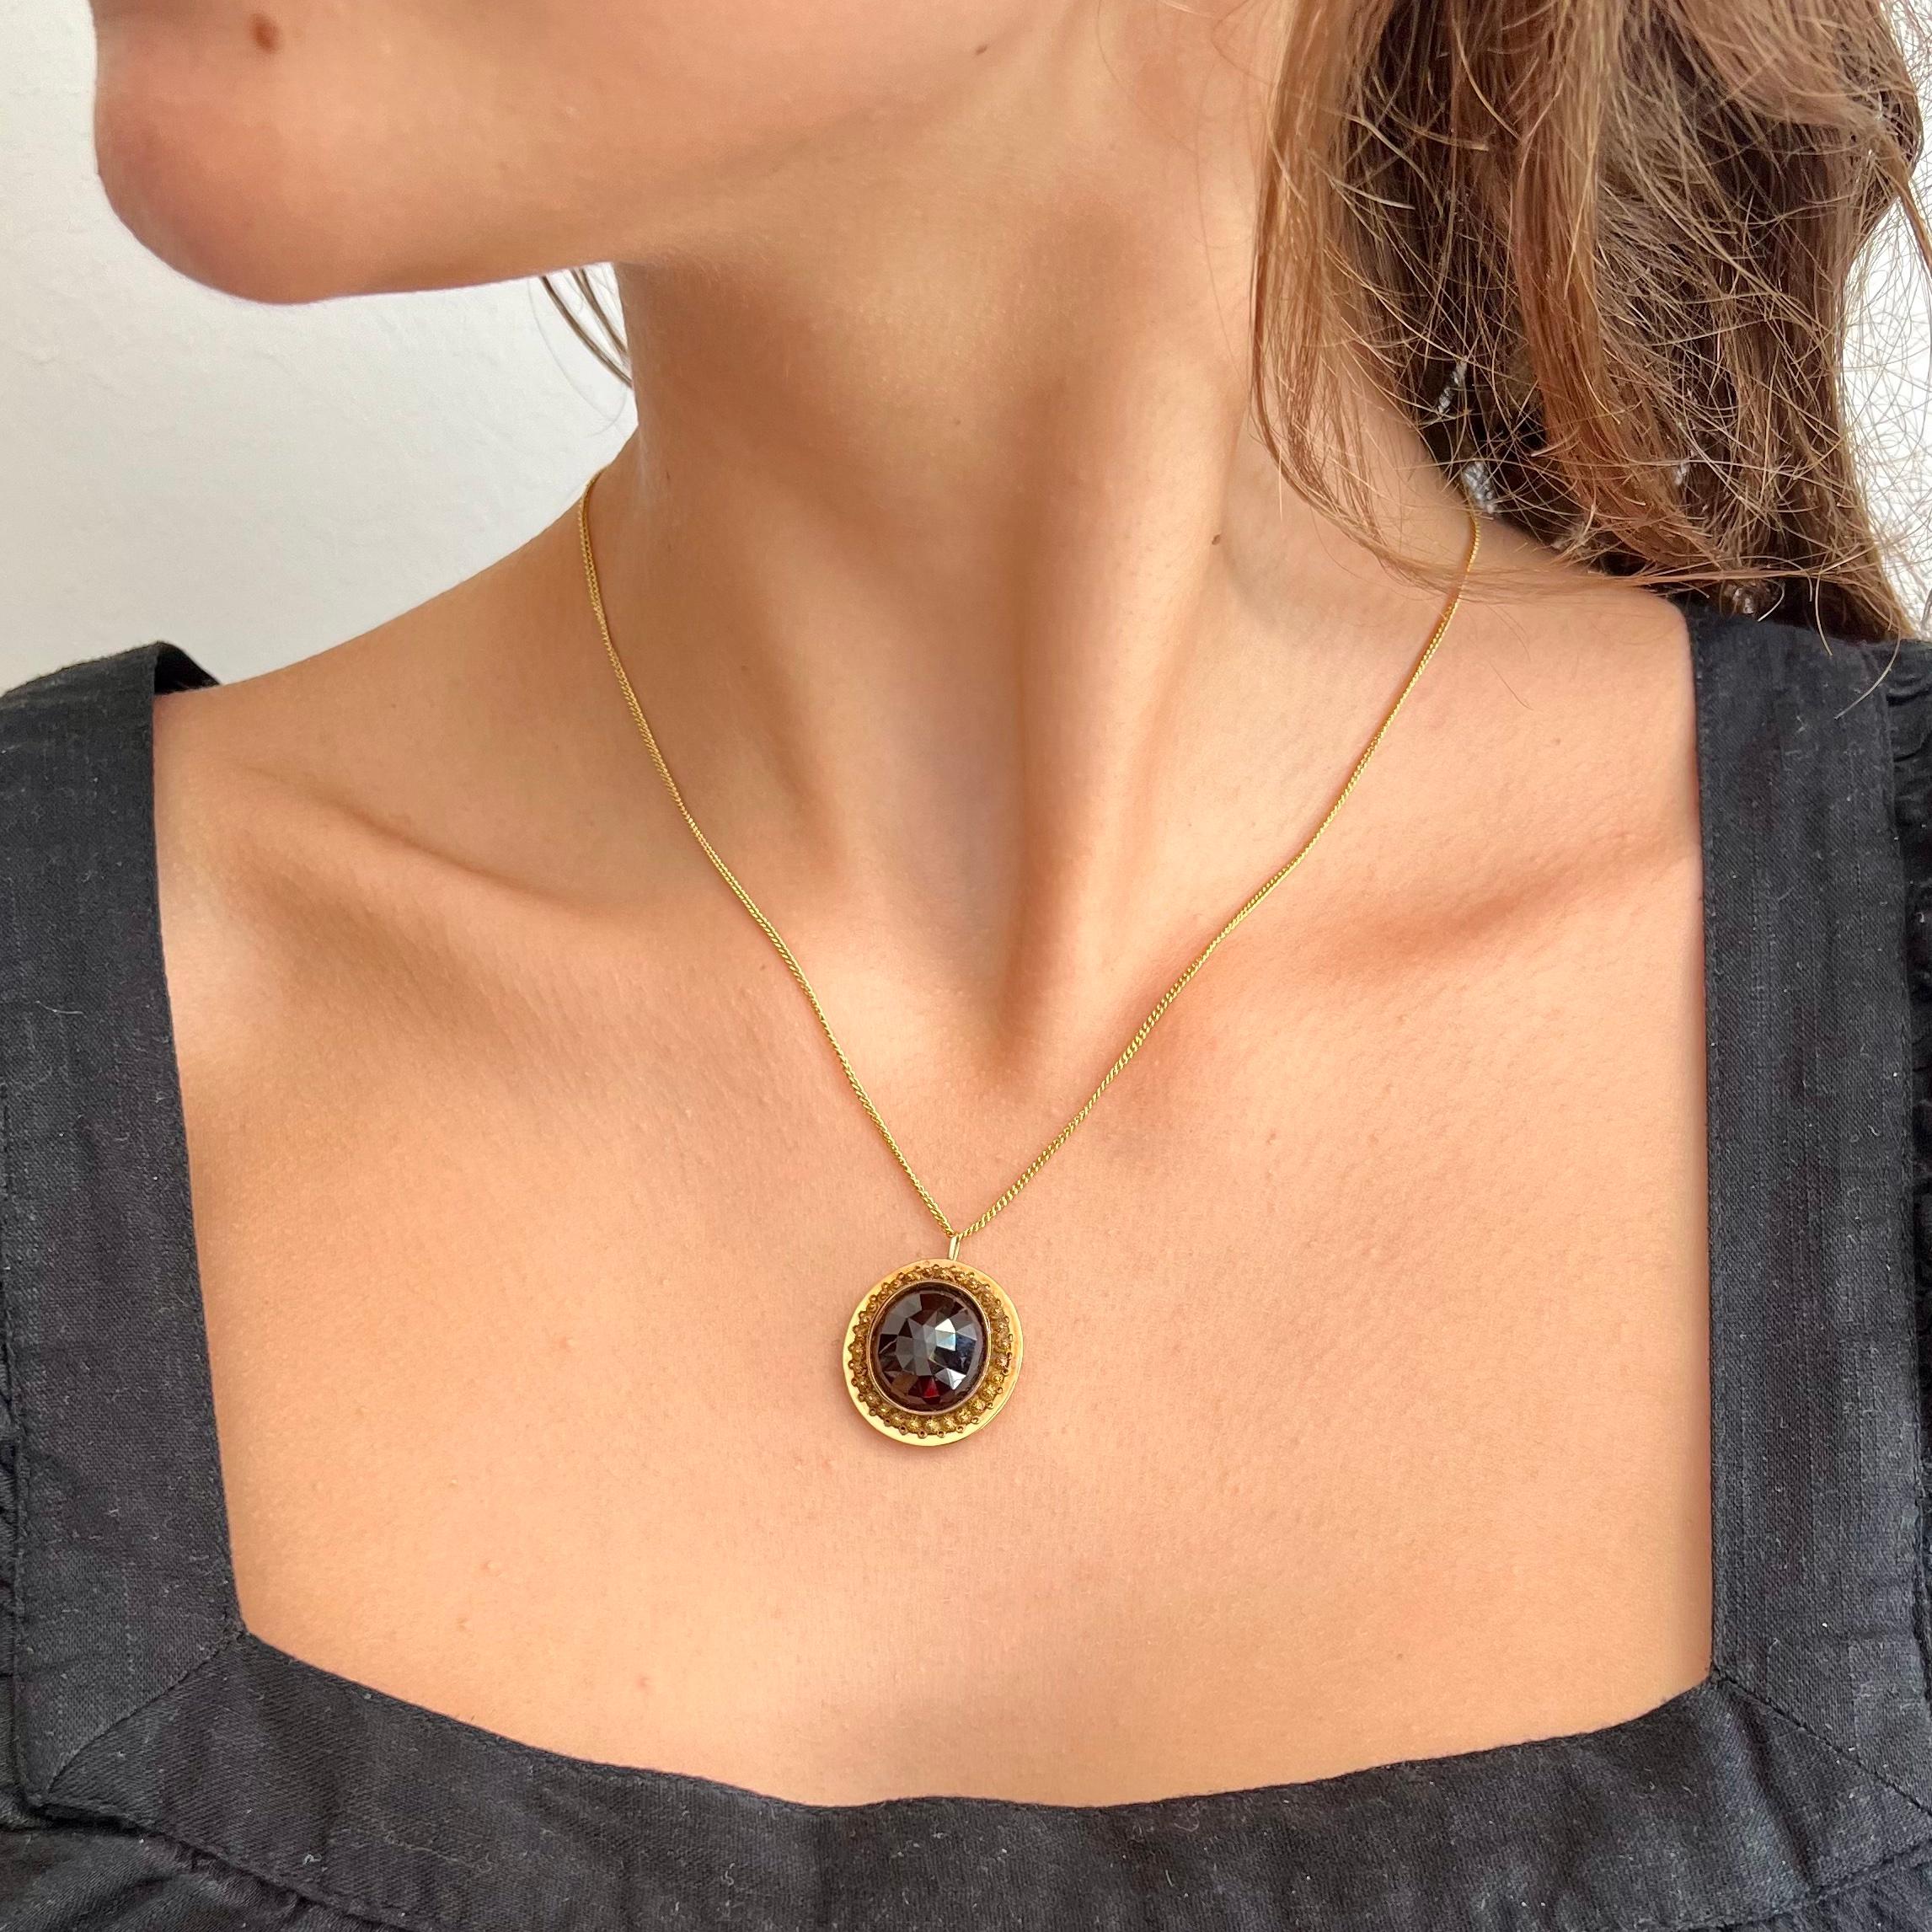 An antique 19th century gold cannetille pendant set with an oval-shaped faceted garnet stone. The cannetille work is delicately made by hand. In the Netherlands they also call these rosettes 'spiders', there is the spiders body in the center